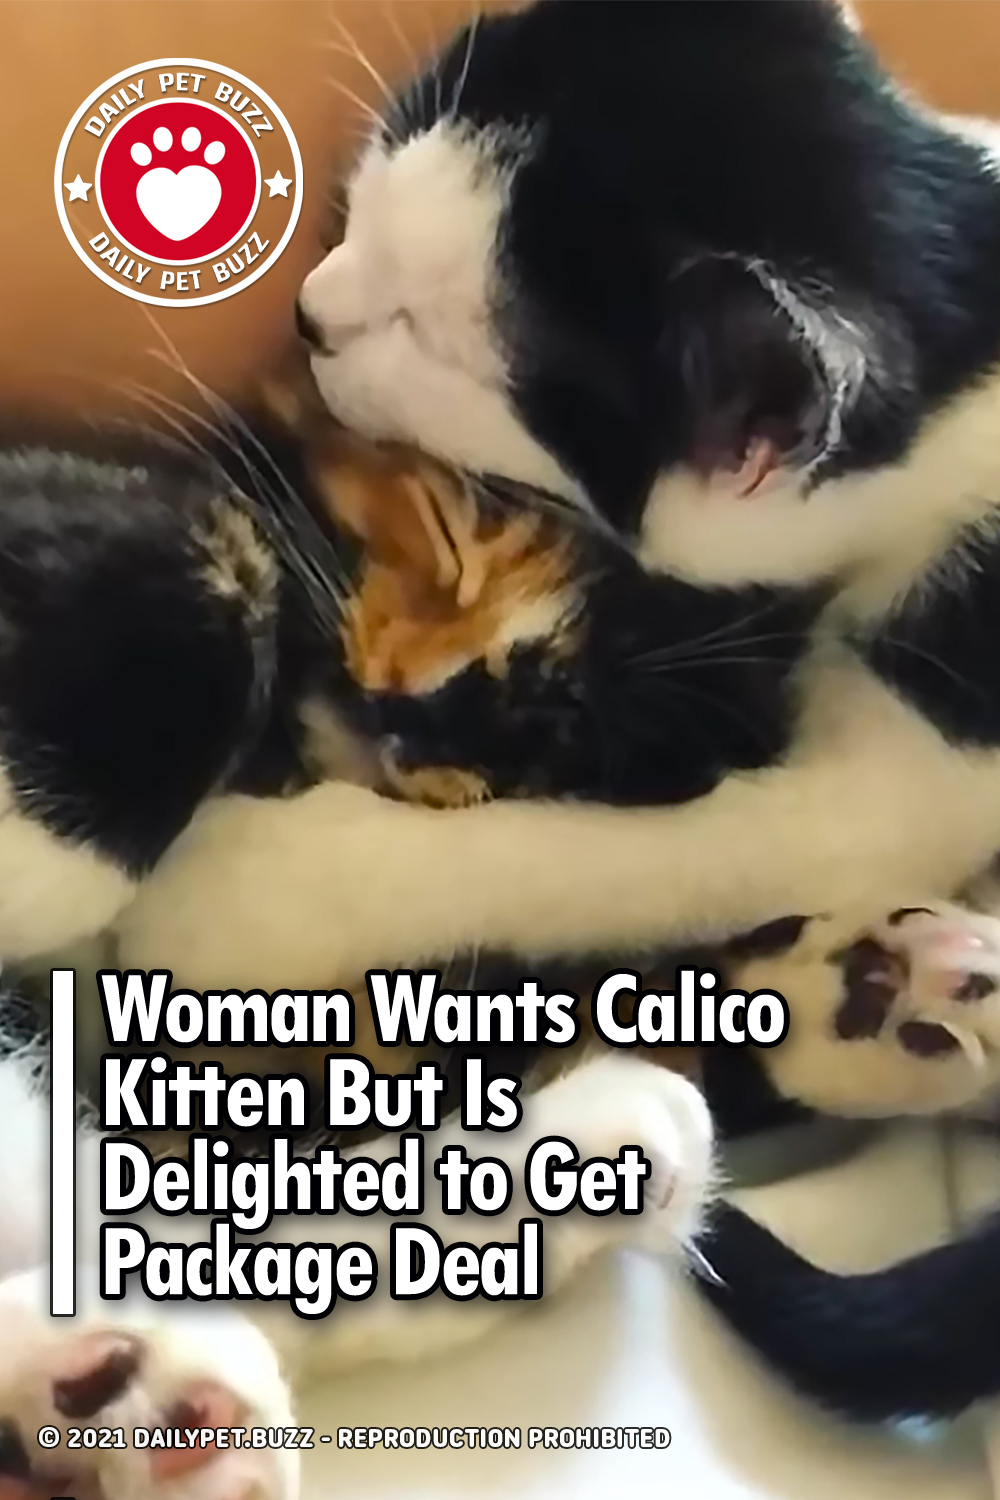 Woman Wants Calico Kitten But Is Delighted to Get Package Deal